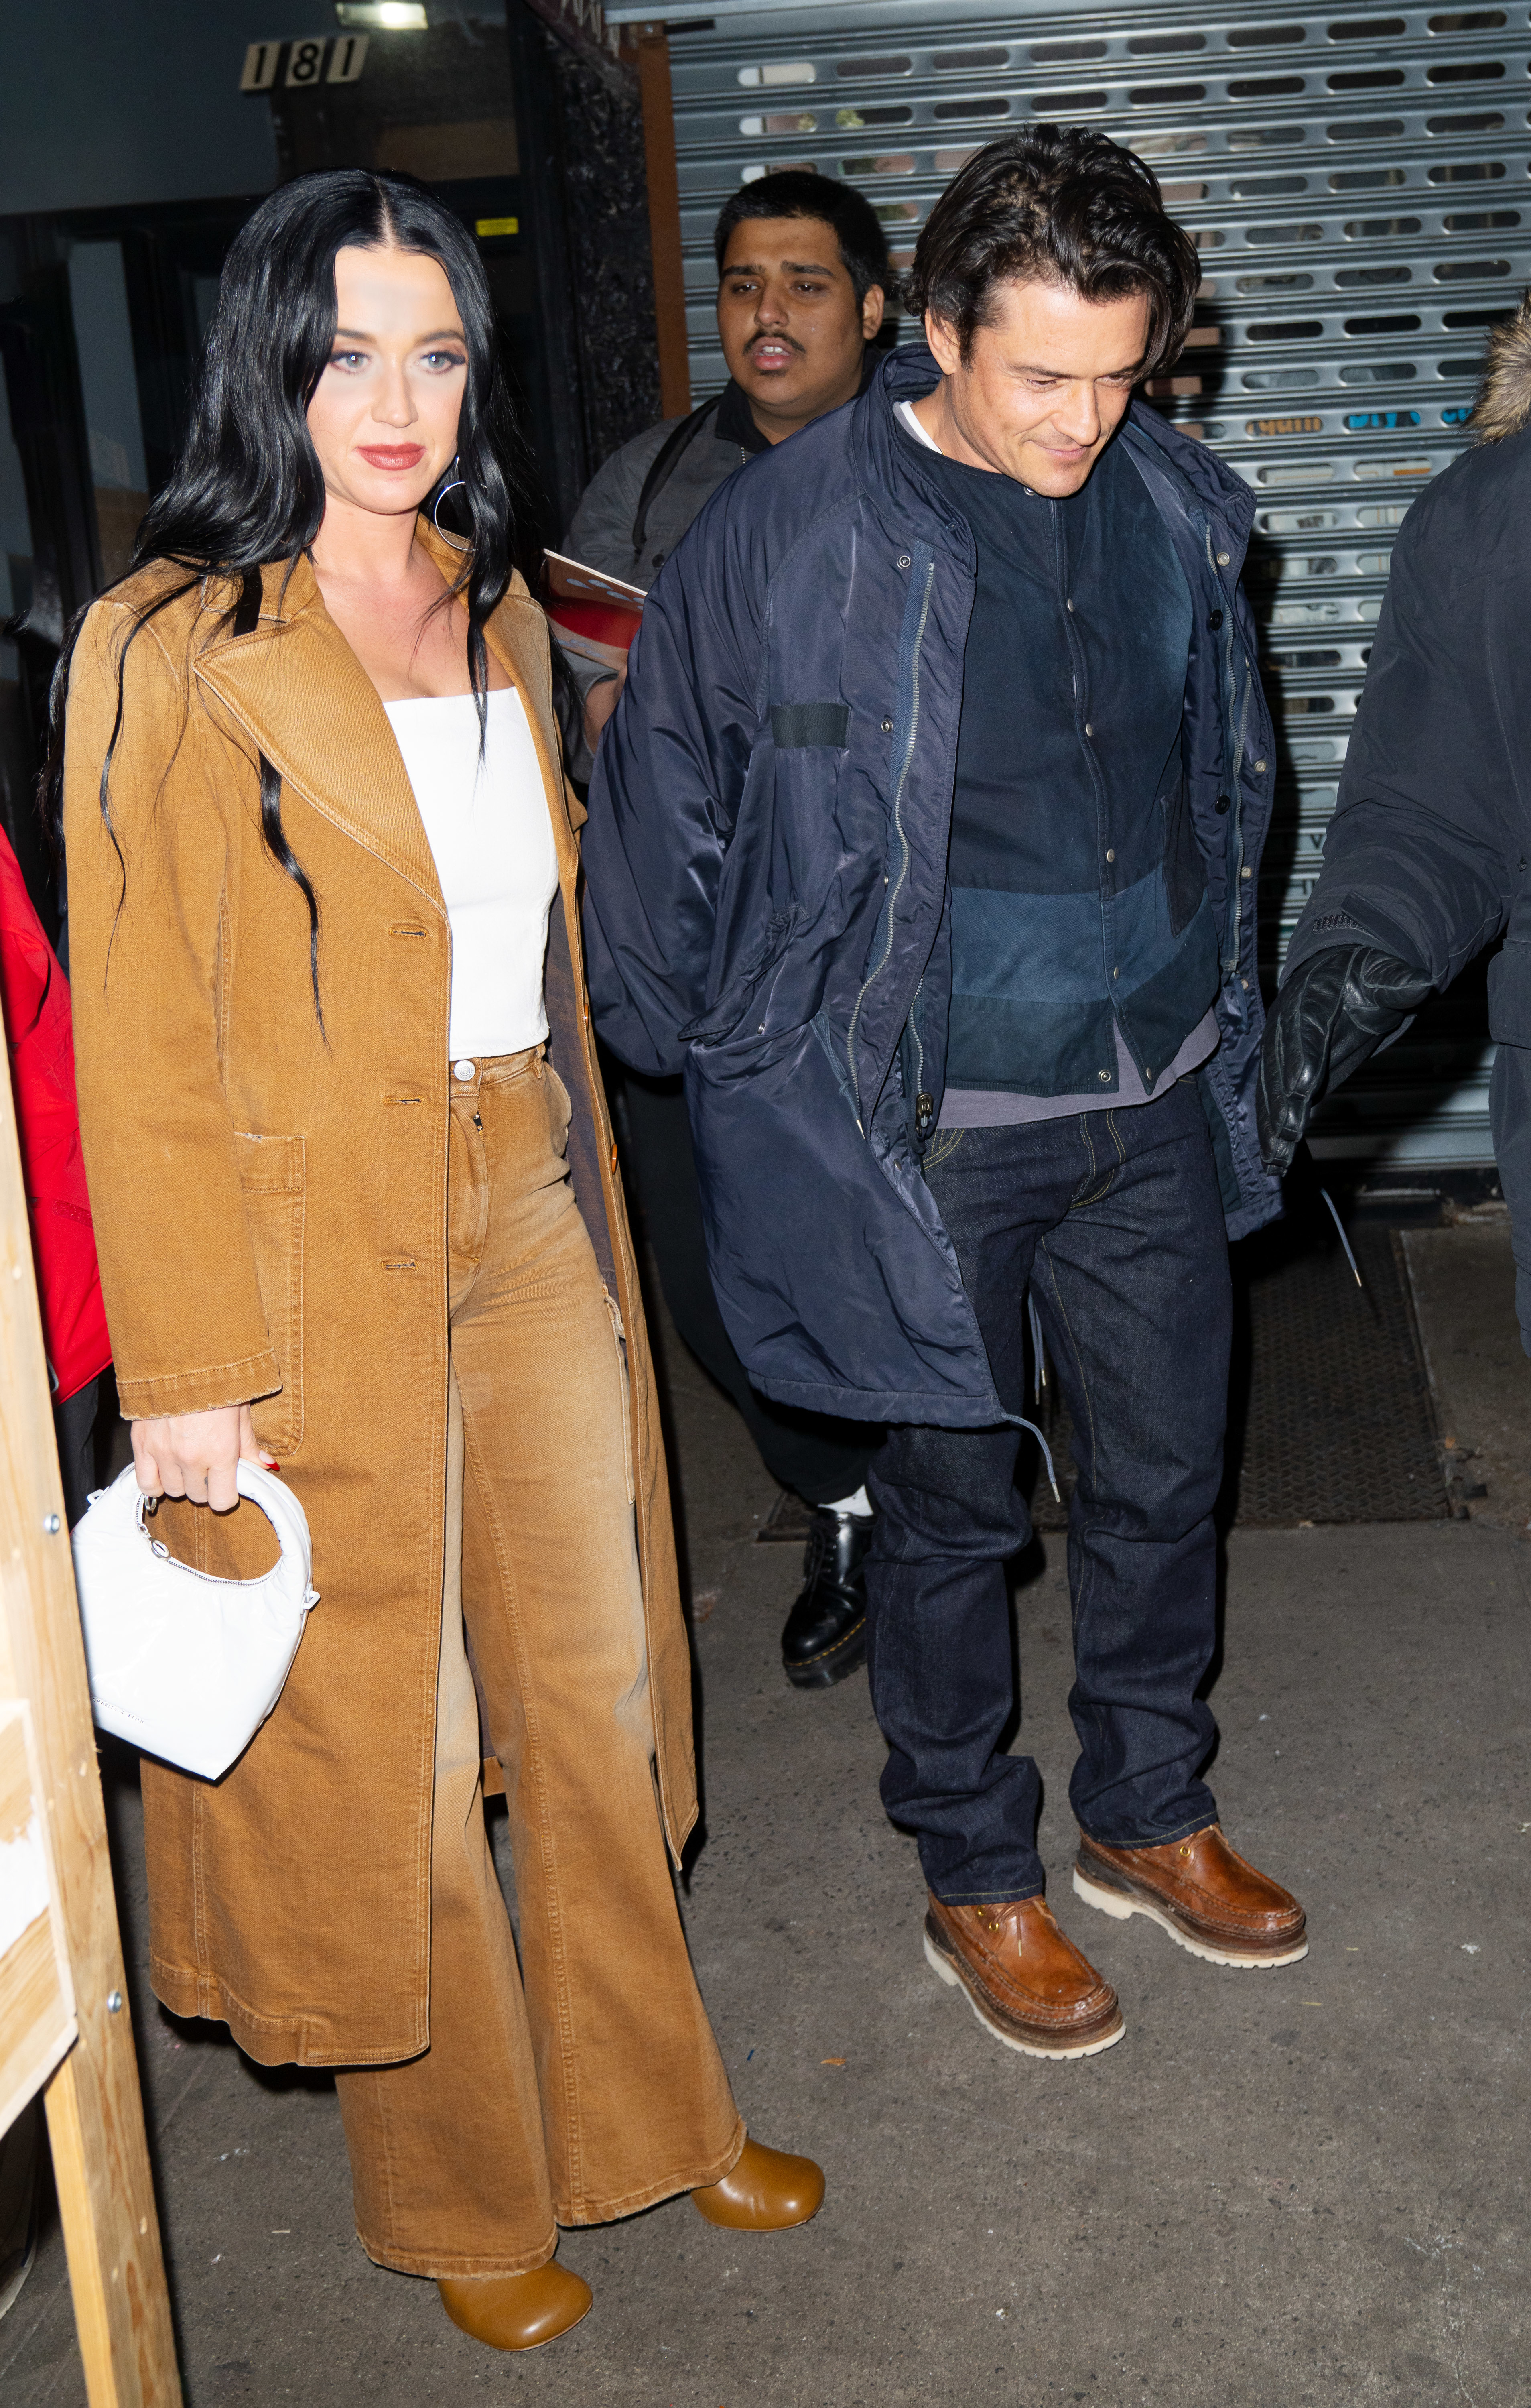 Katy Perry wears a long coat over a top and flared trousers as she walks with Orlando Bloom who&#x27;s wearing a casual jacket and jeans